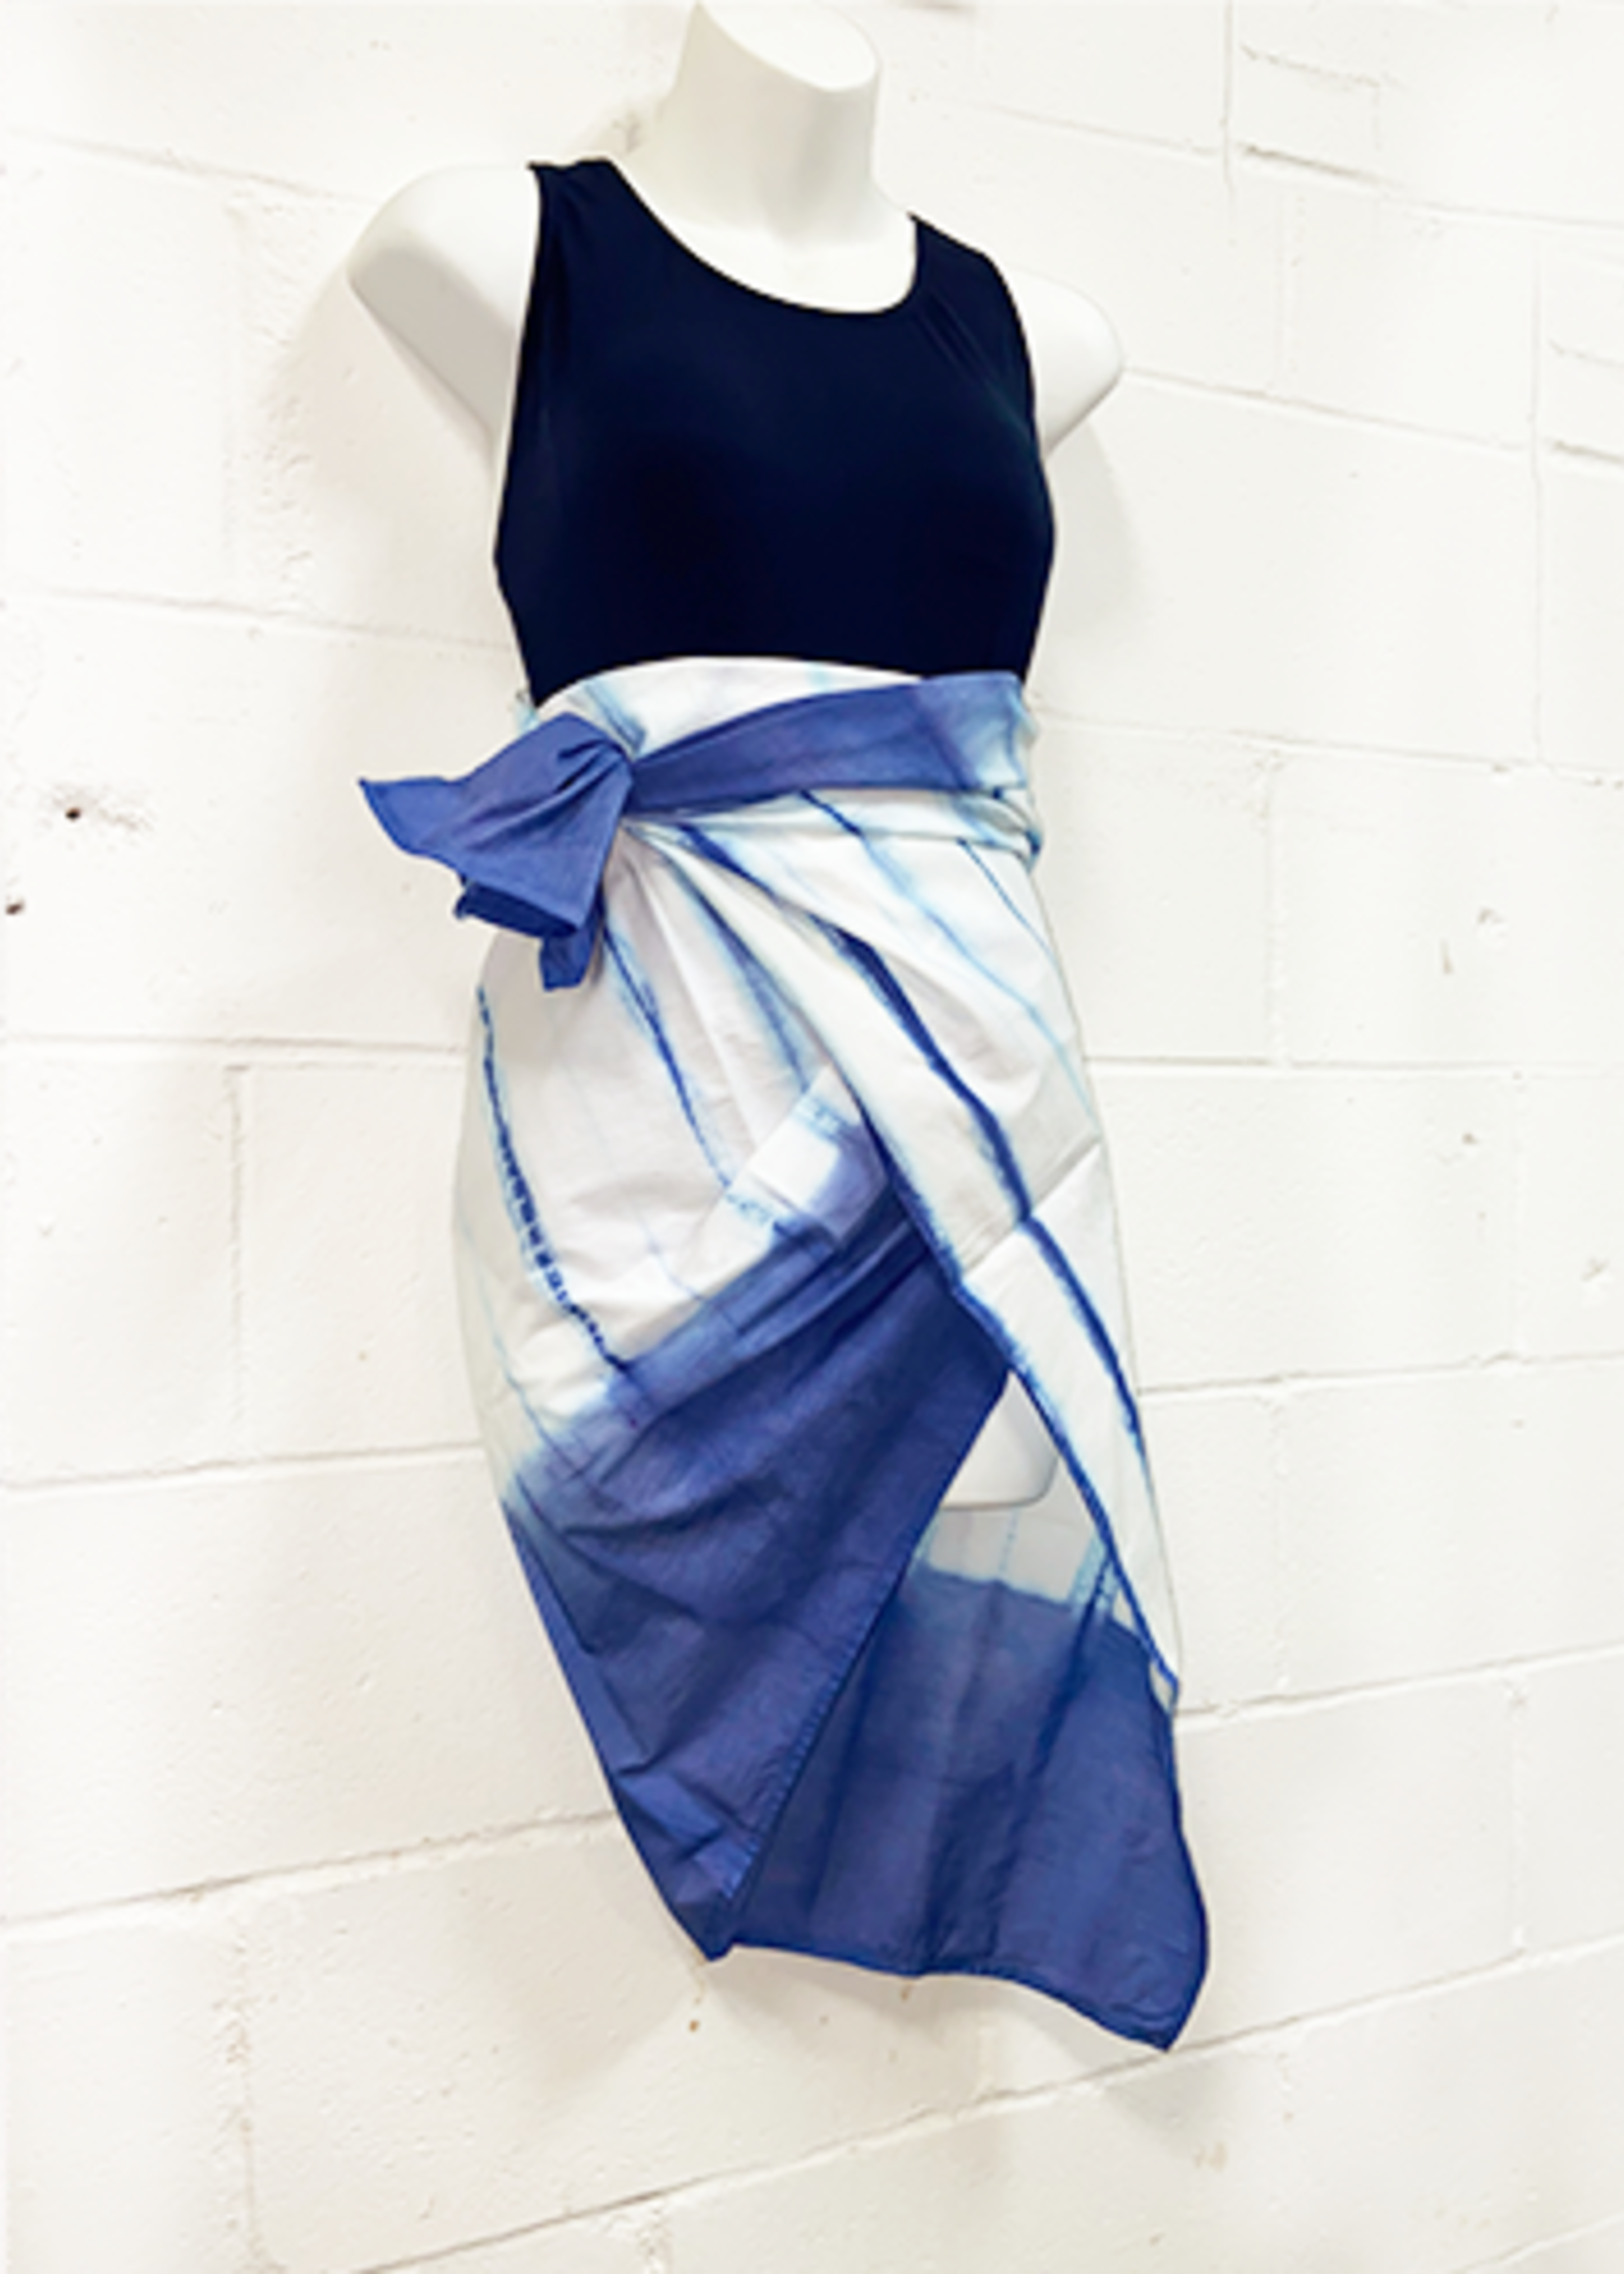 Aquatic Outfitters of Ohio Hand Dyed Sarong